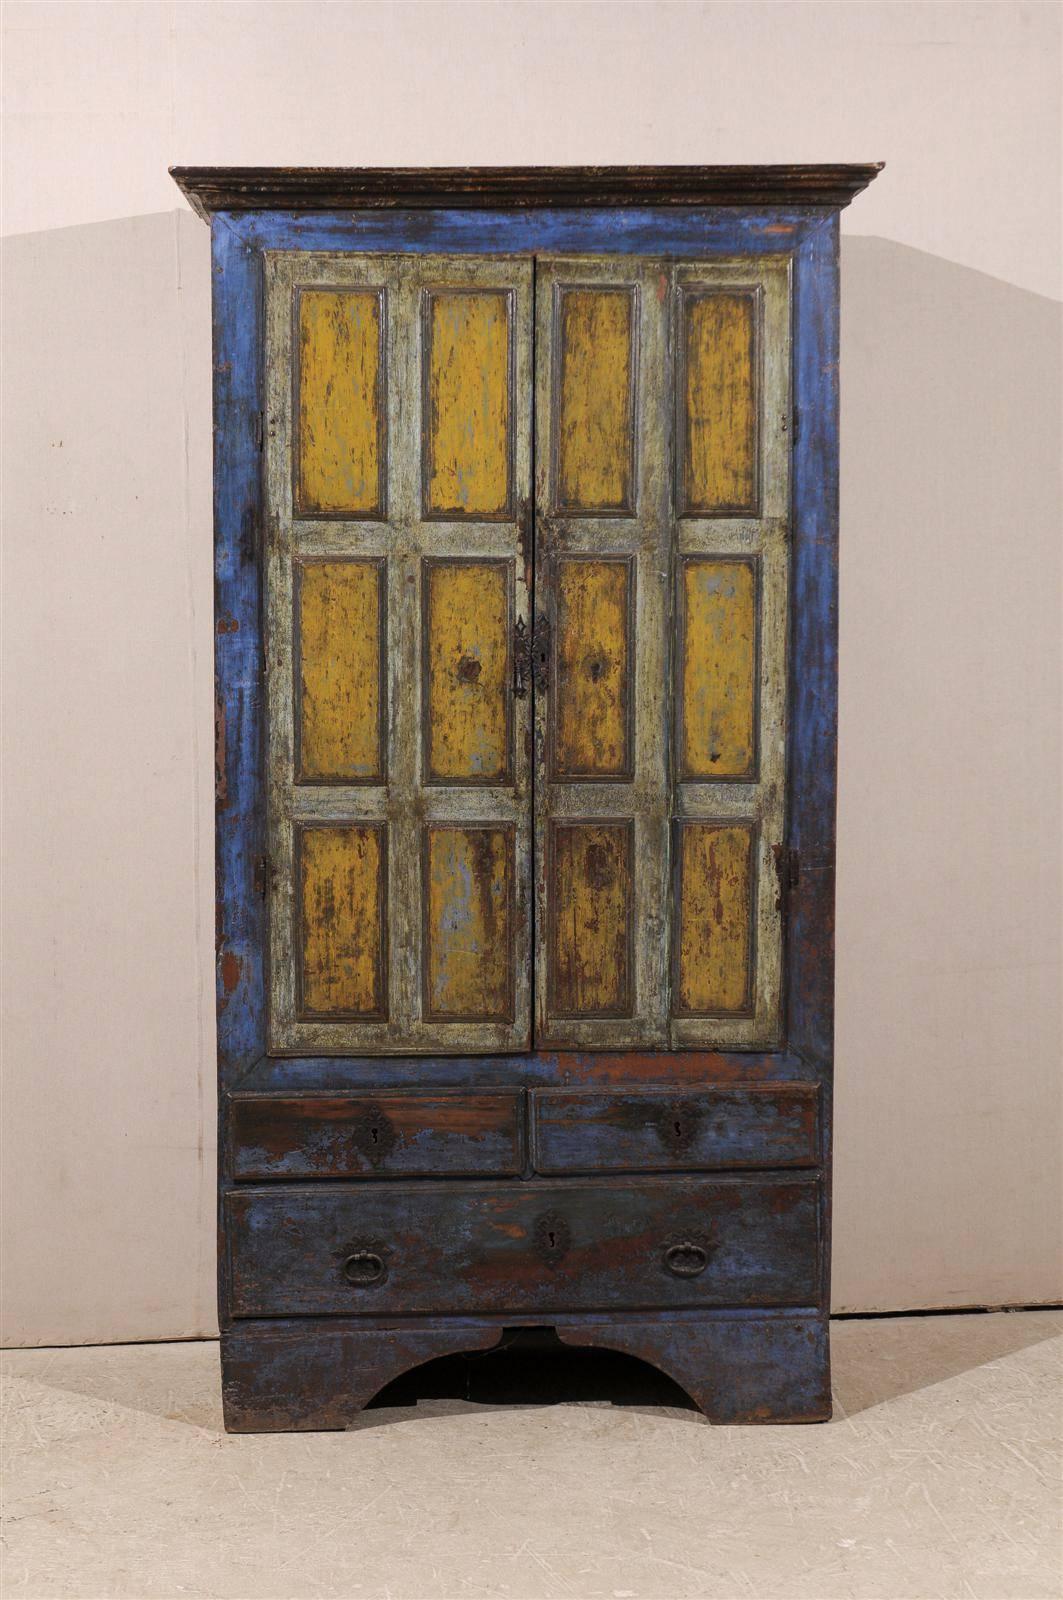 An early 19th century wooden Brazilian cabinet with original old blue and yellow paint, two doors over three drawers and multiple inner shelves. 

This rustic cabinet stands tall and firm. It is painted with blue and red accents in the surround